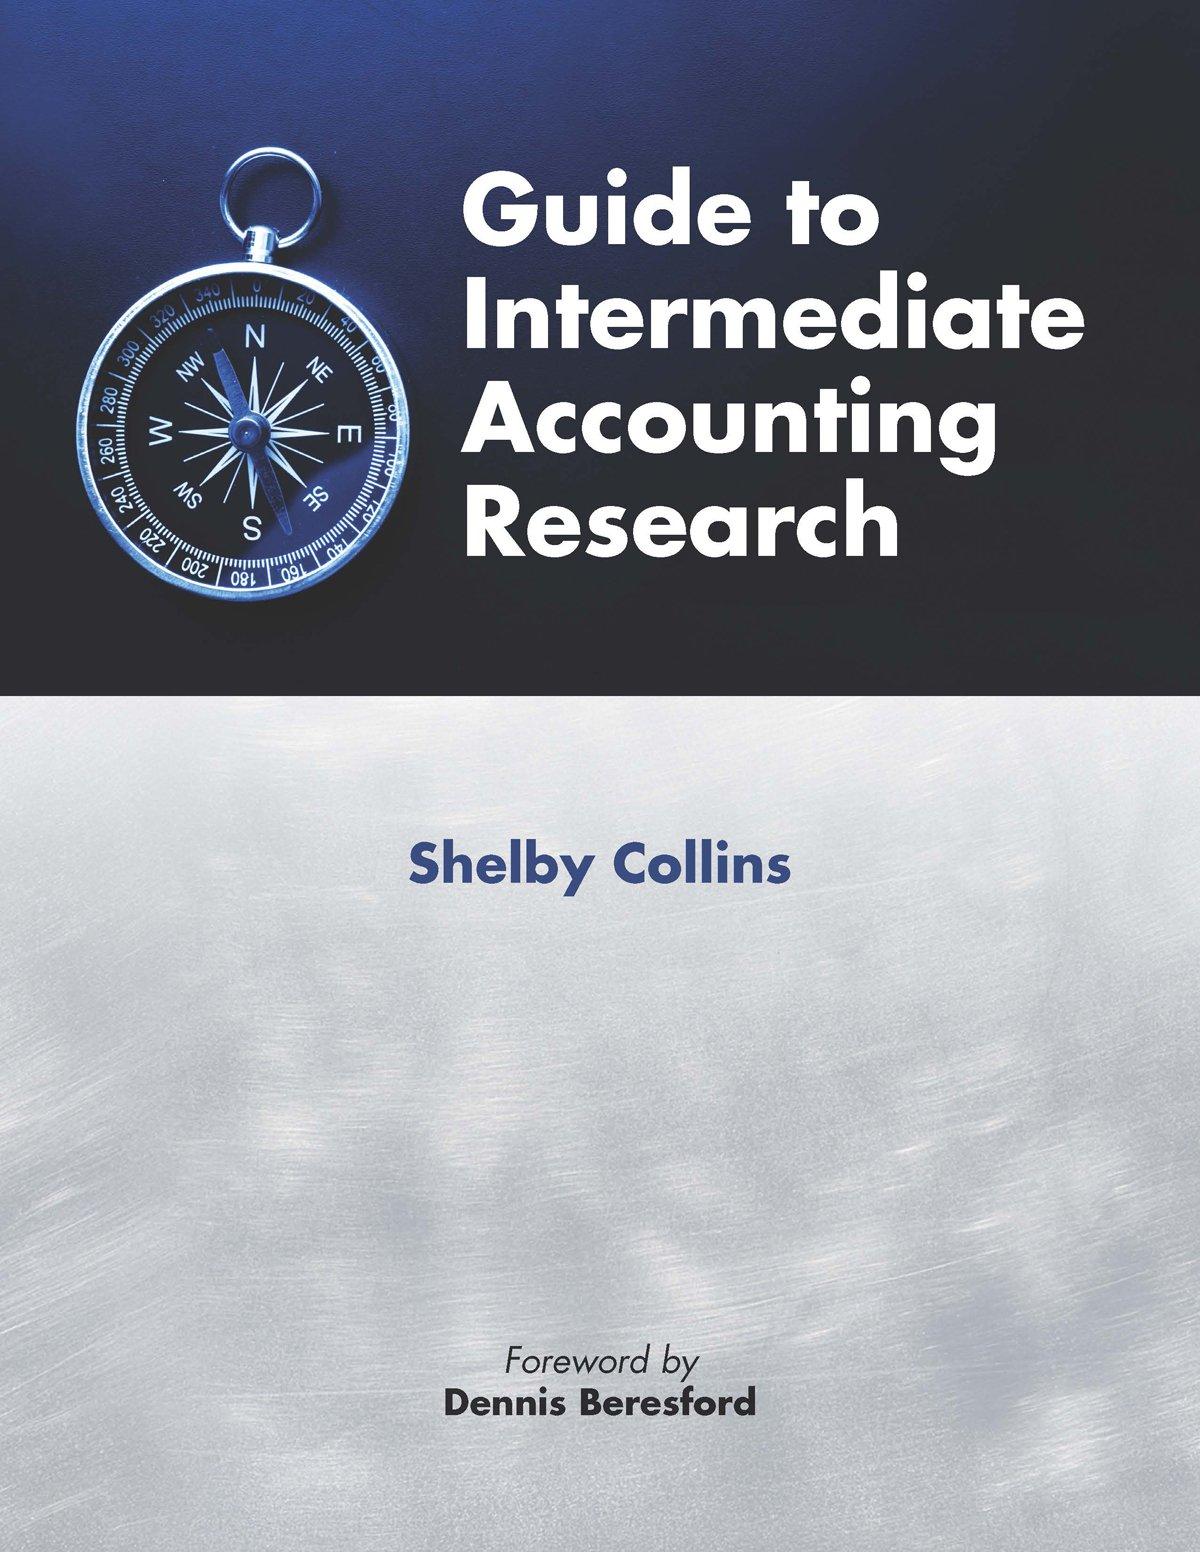 guide to intermediate accounting research 1st edition shelby collins 1618531638, 978-1618531636